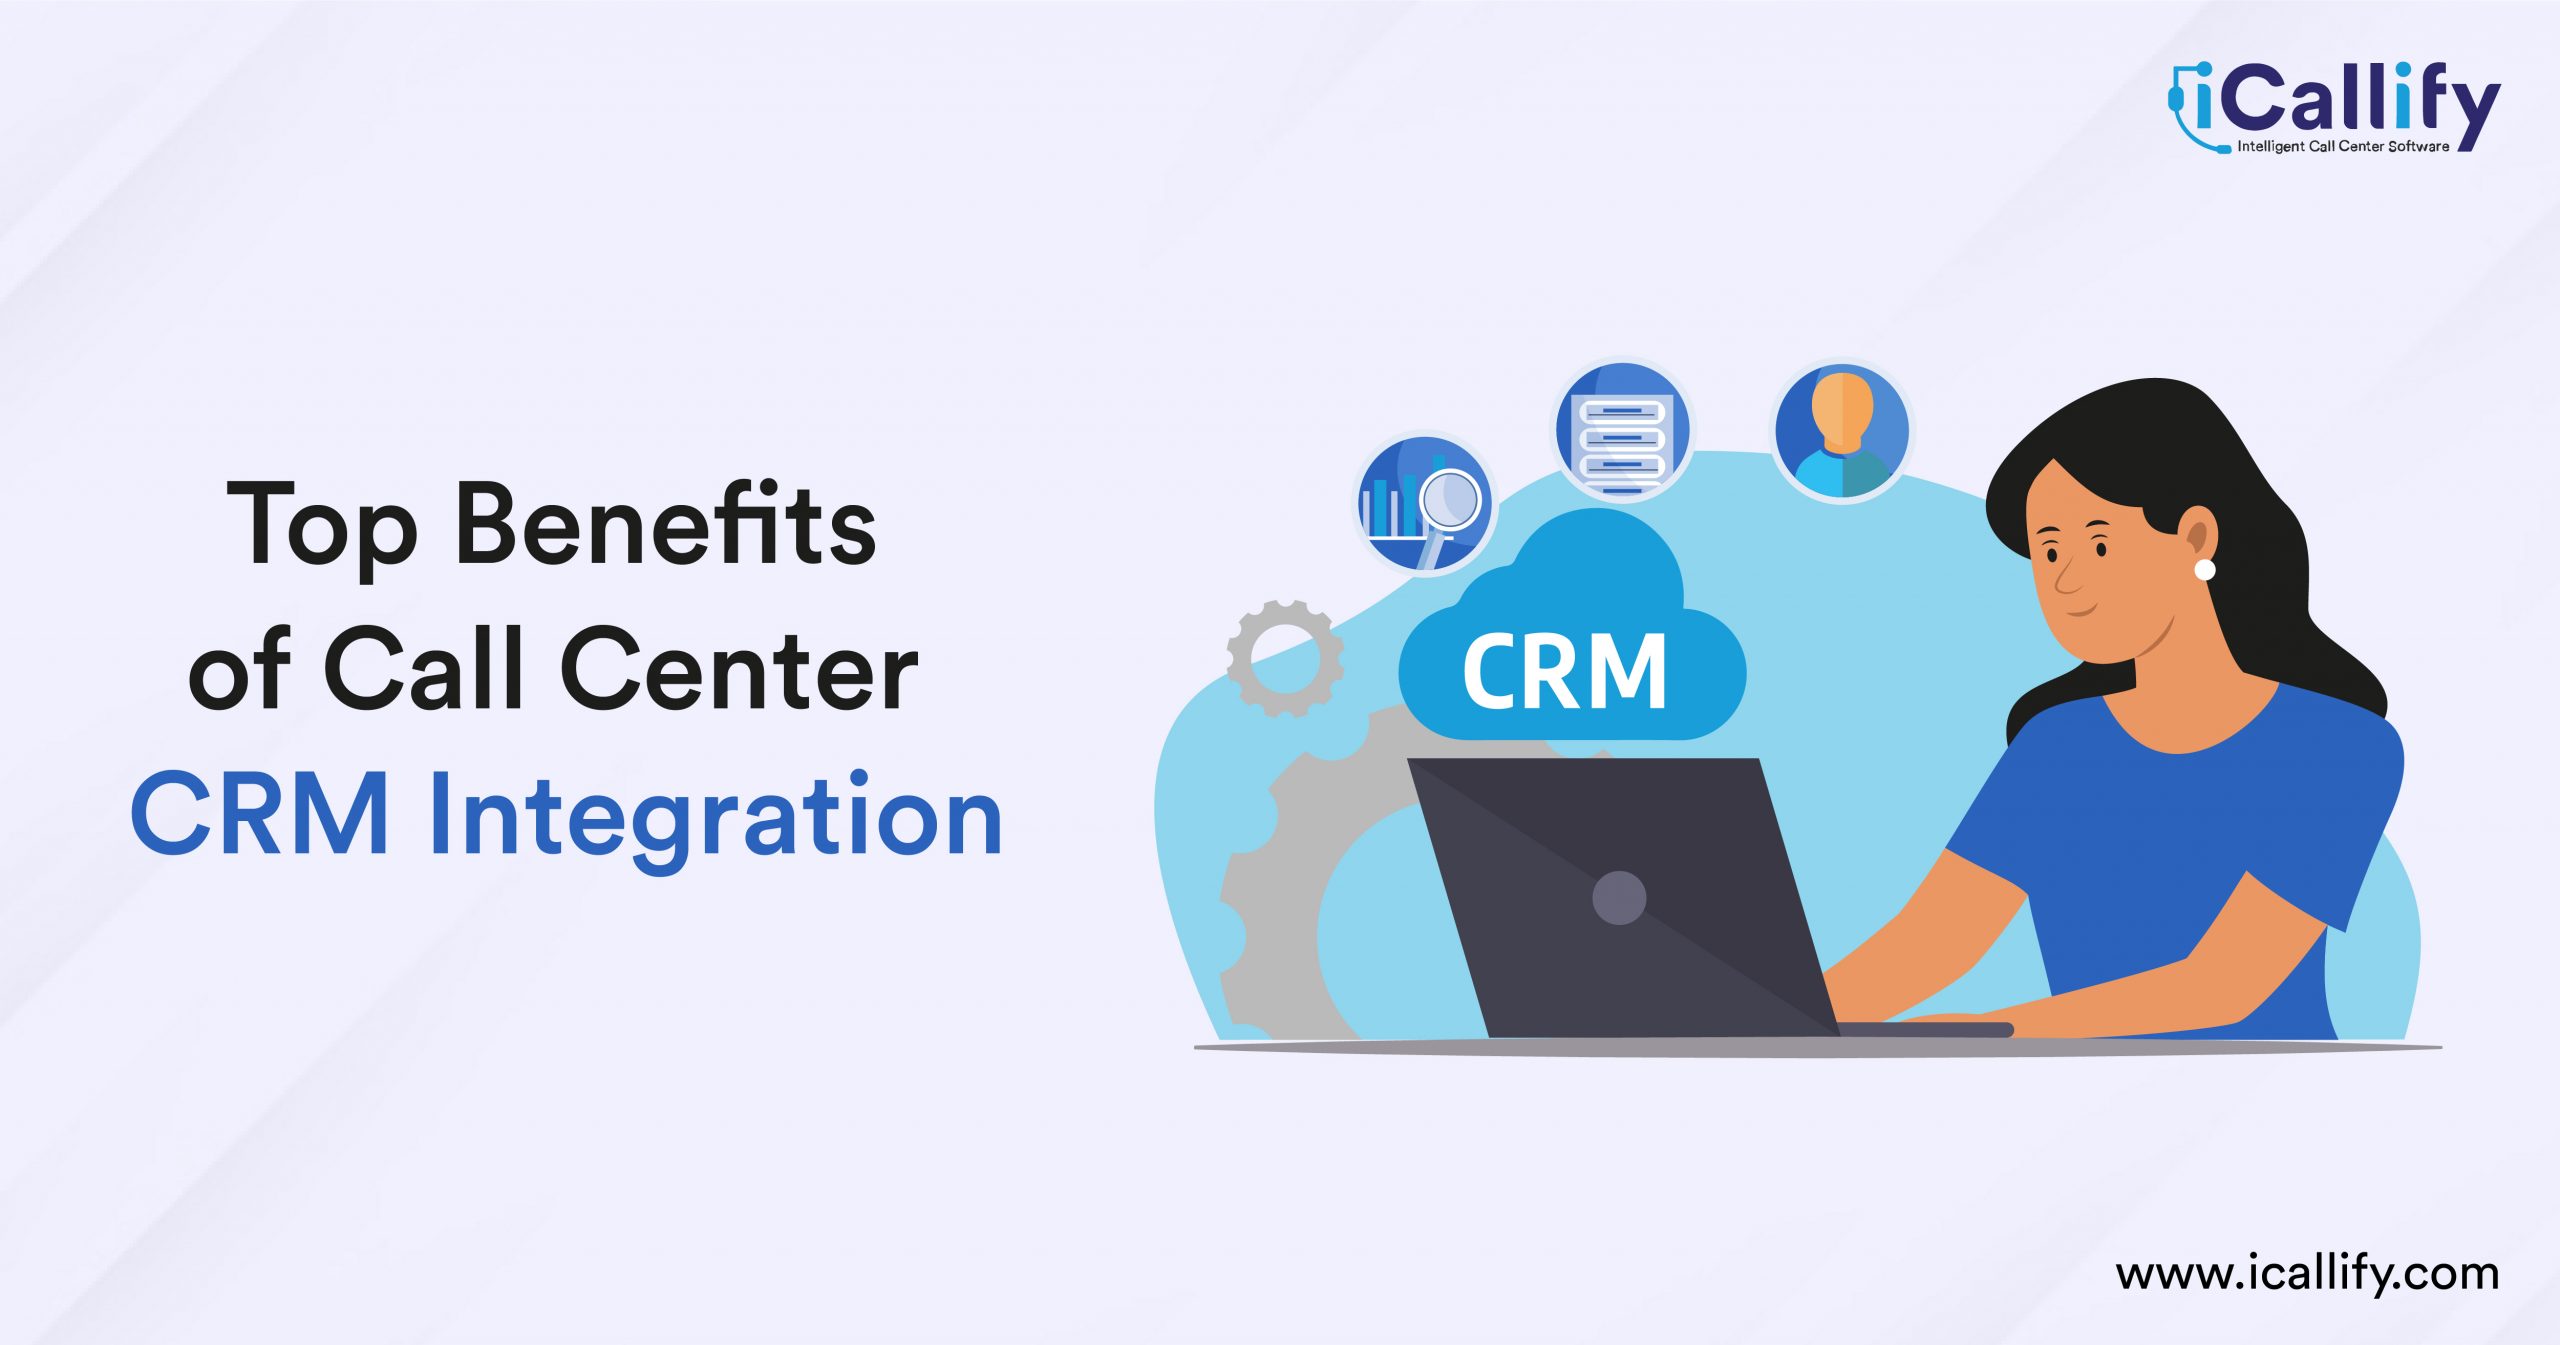 Top Benefits of Call Center CRM Integration